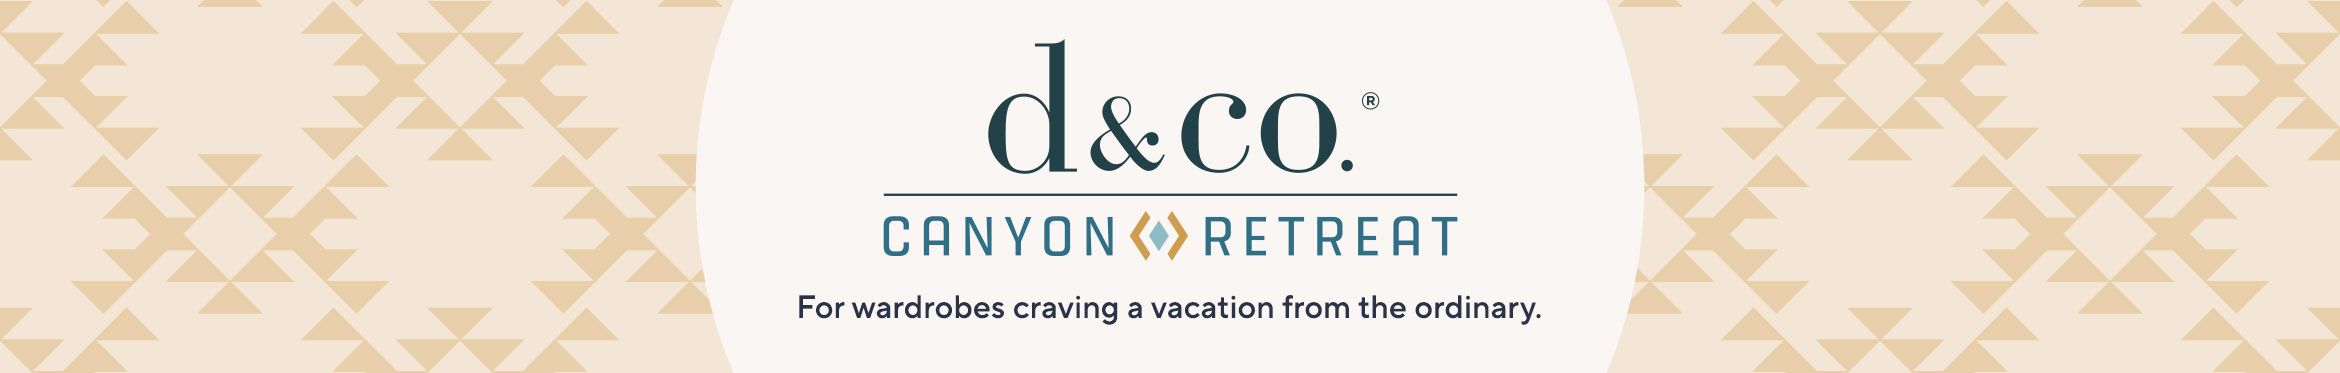 Denim & Co. Canyon Retreat: For wardrobes craving a vacation from the ordinary.